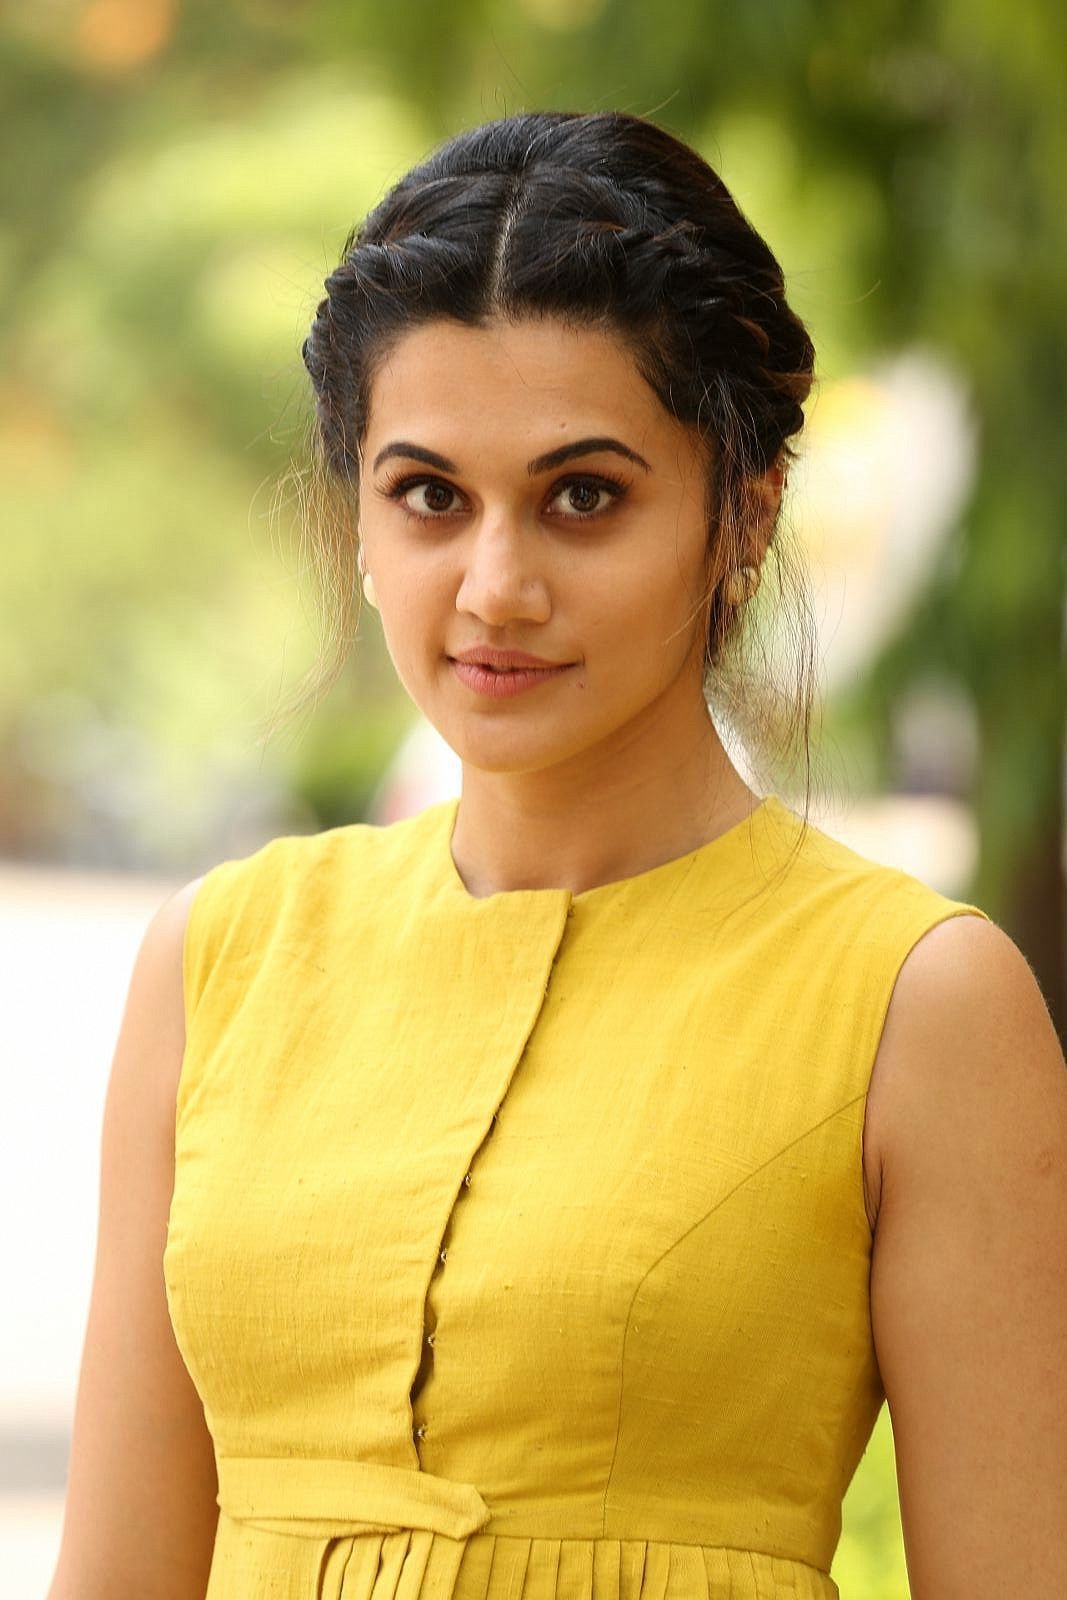 Taapsee Pannu at Anando Brahma Movie Motion Poster Launch Photos | Picture 1500633